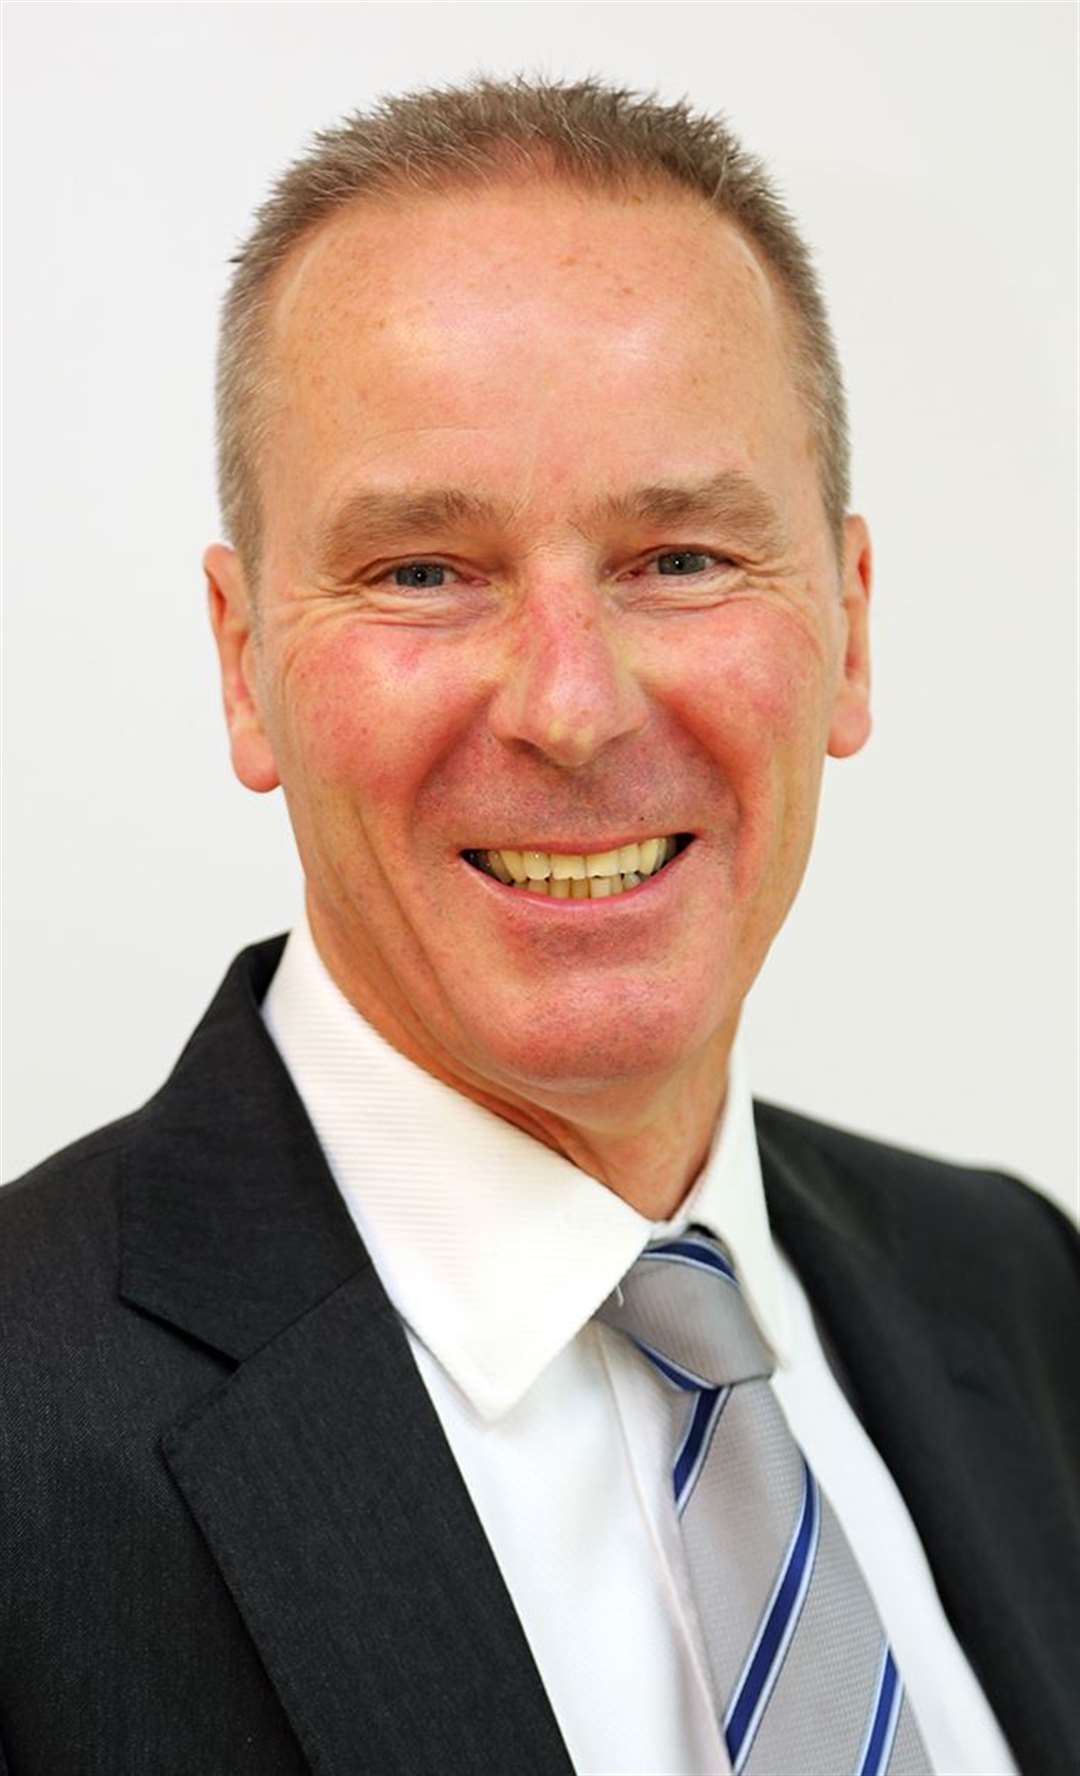 Simon O'Keefe, chief executive officer of The Stour Academy Trust